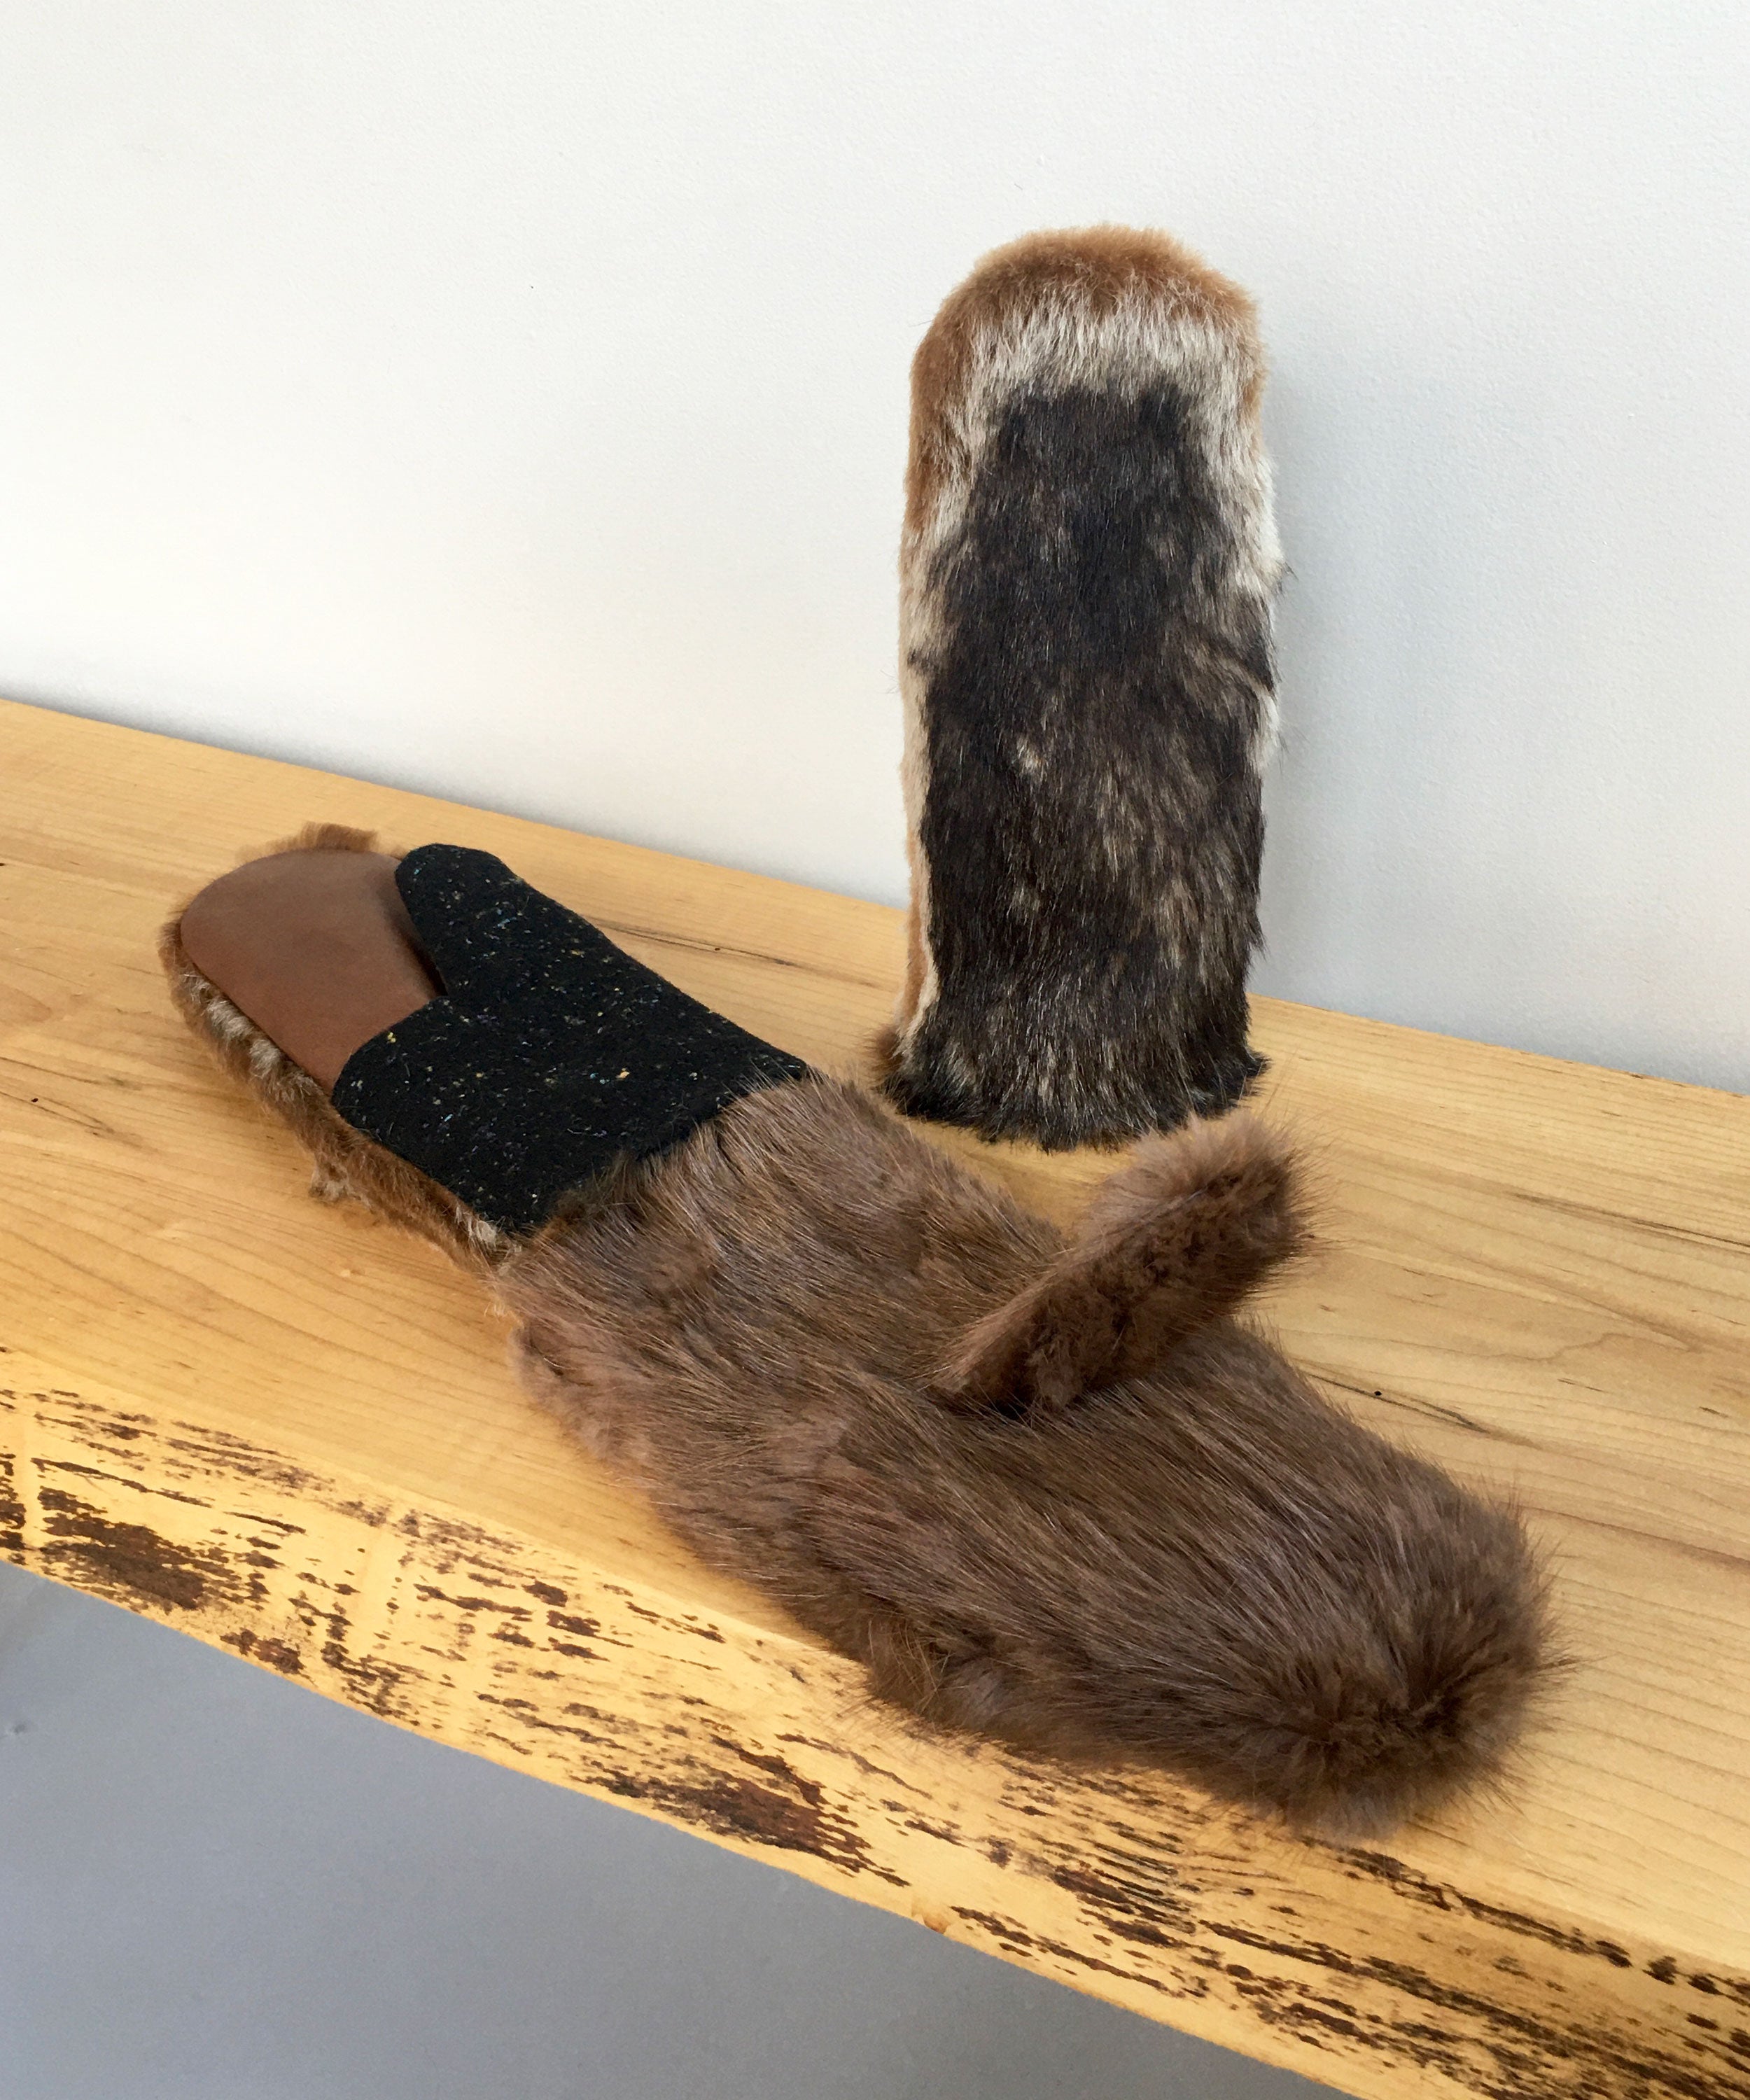 real fur mittens canada, women's fur lined gloves mittens sheepskin mitts for arctic weather, eco friendly made from vintage fur coats. what should i do with my fur coat? muskrat fur mitten with sheepskin leather and wool